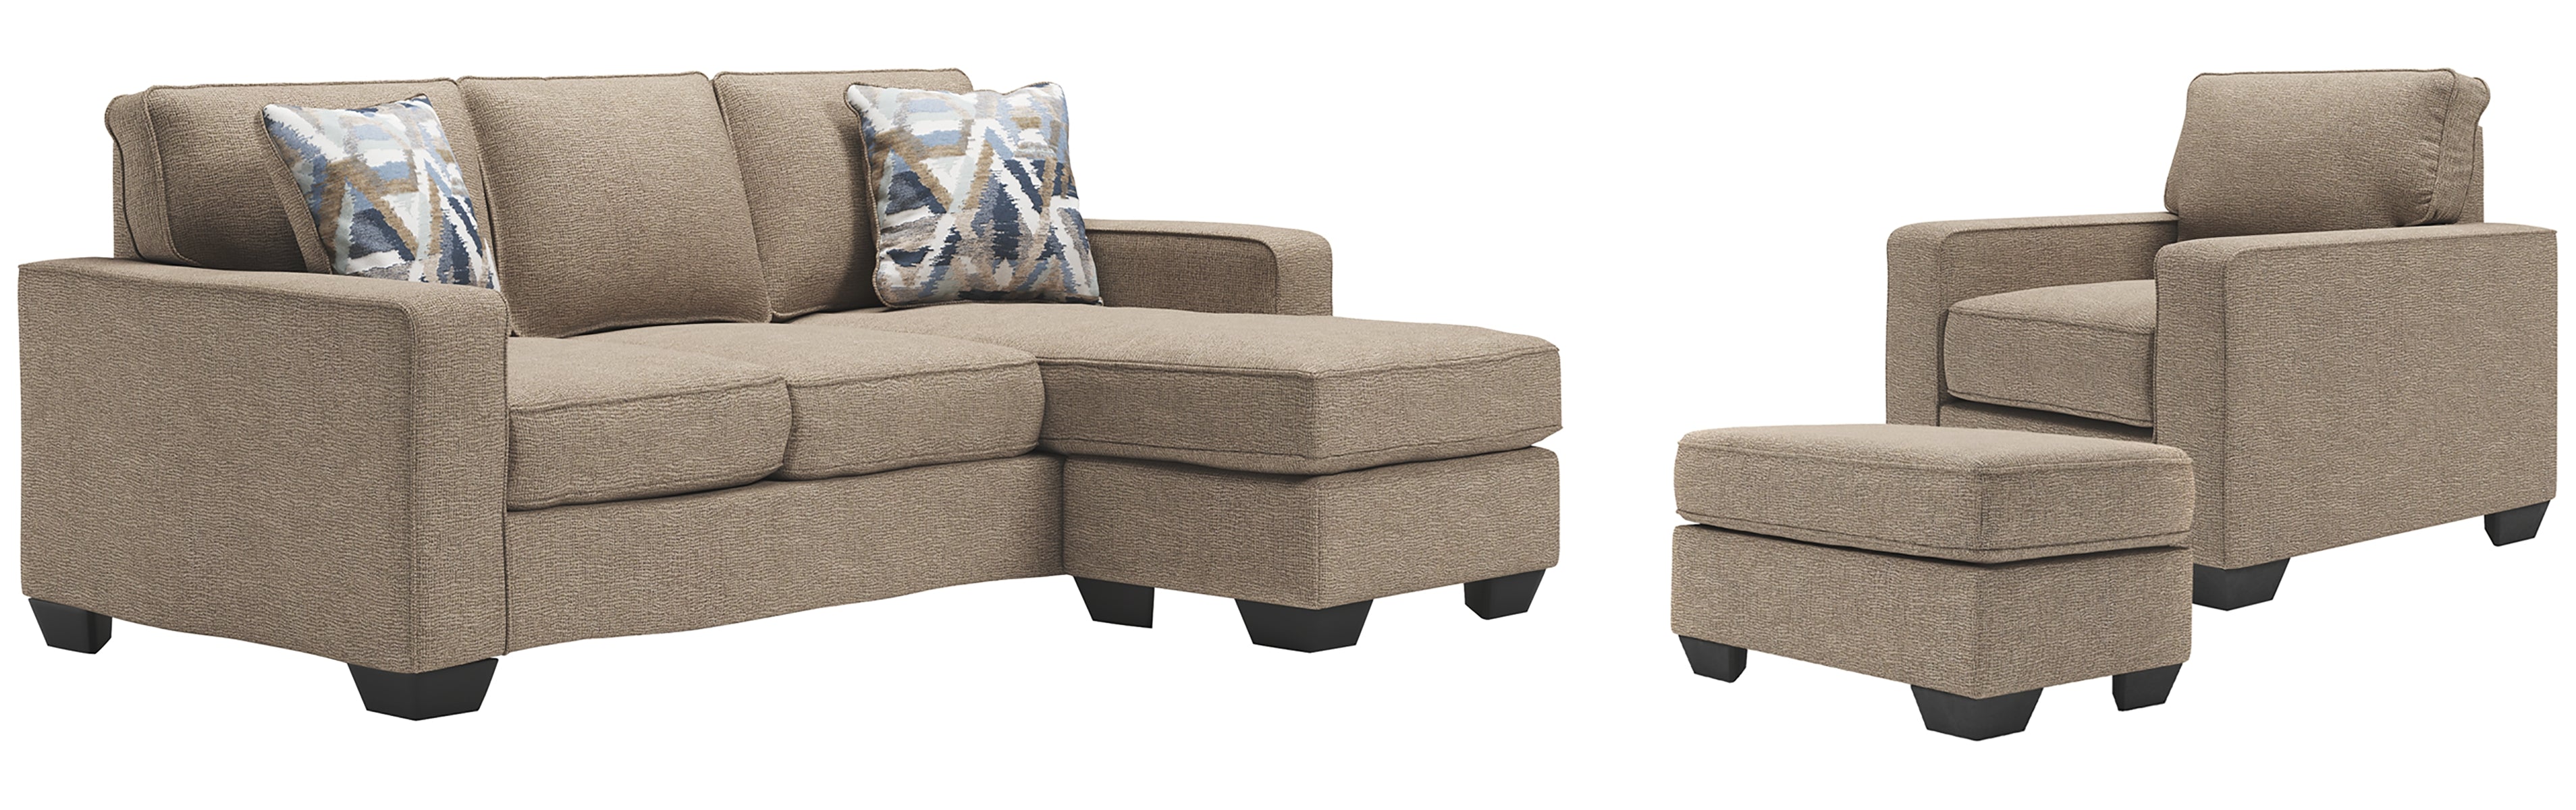 Greaves Sofa Chaise, Chair, and Ottoman